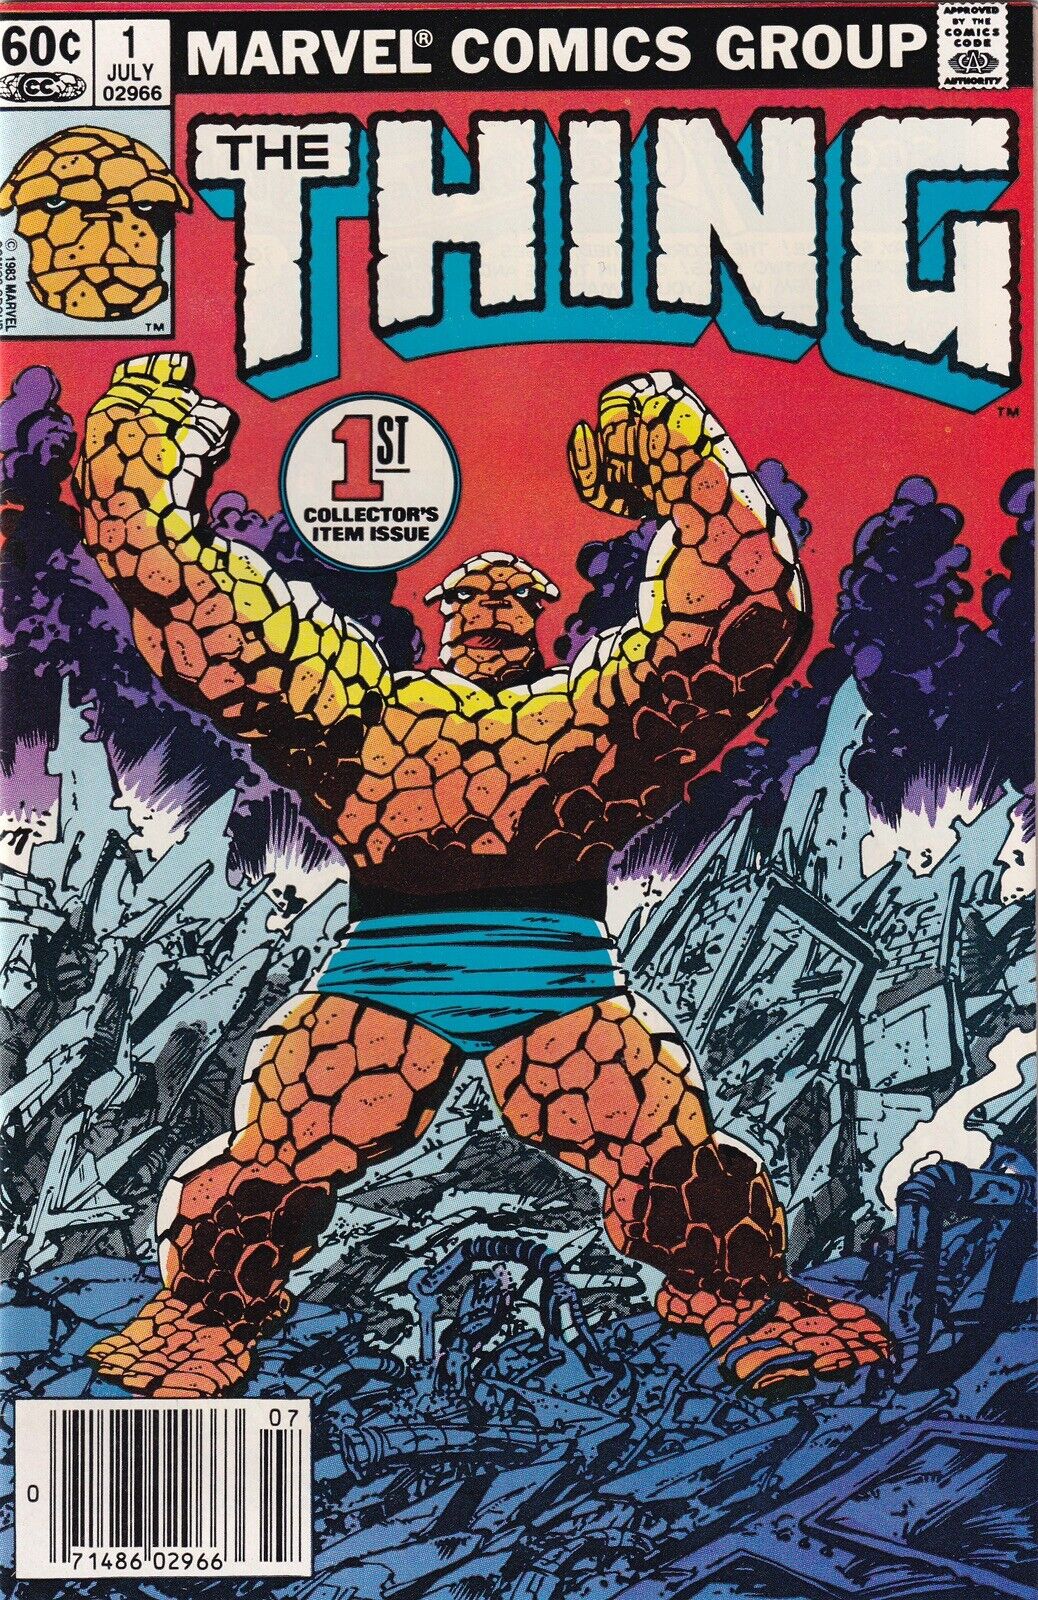 The Thing #1 (Marvel Comics, 1983) 1st Collectors Item Issue John Byrne Cover